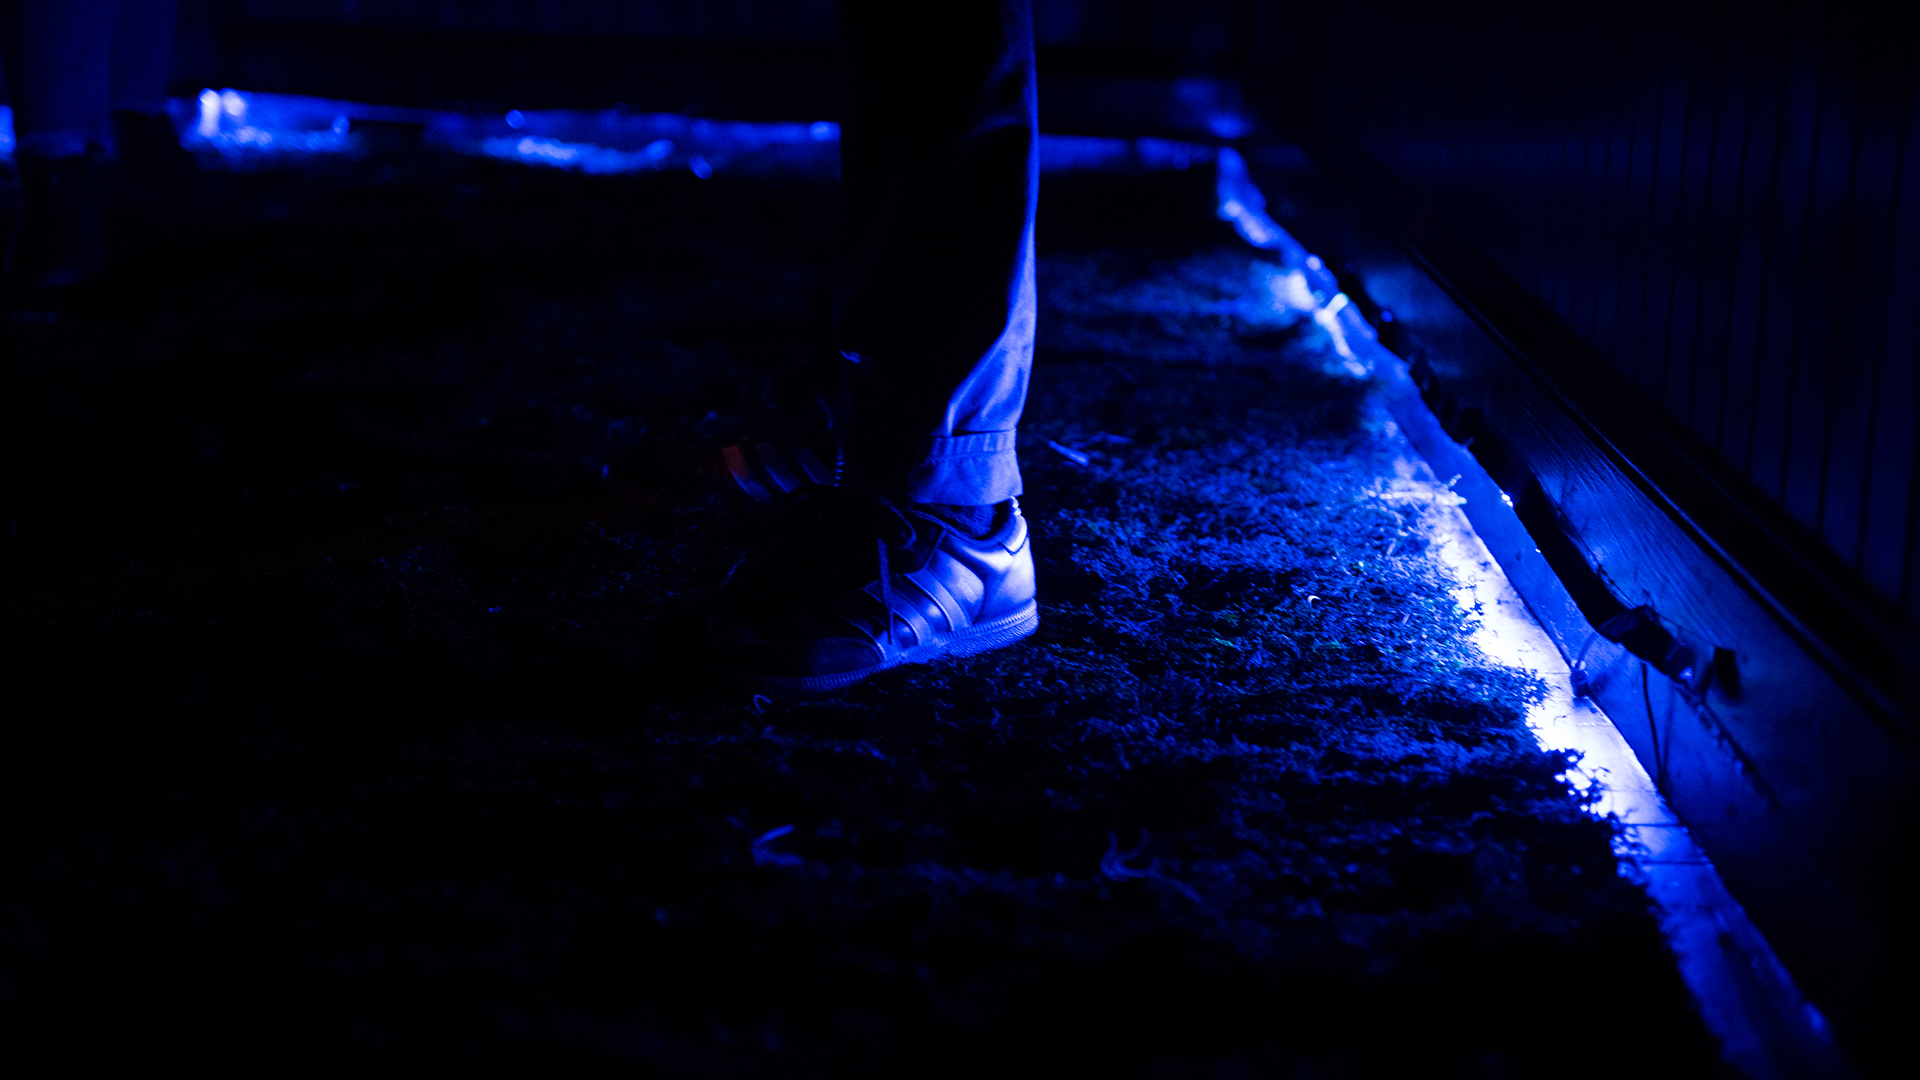 Close up shot of foot of someone standing illuminated by dark blue light along floor